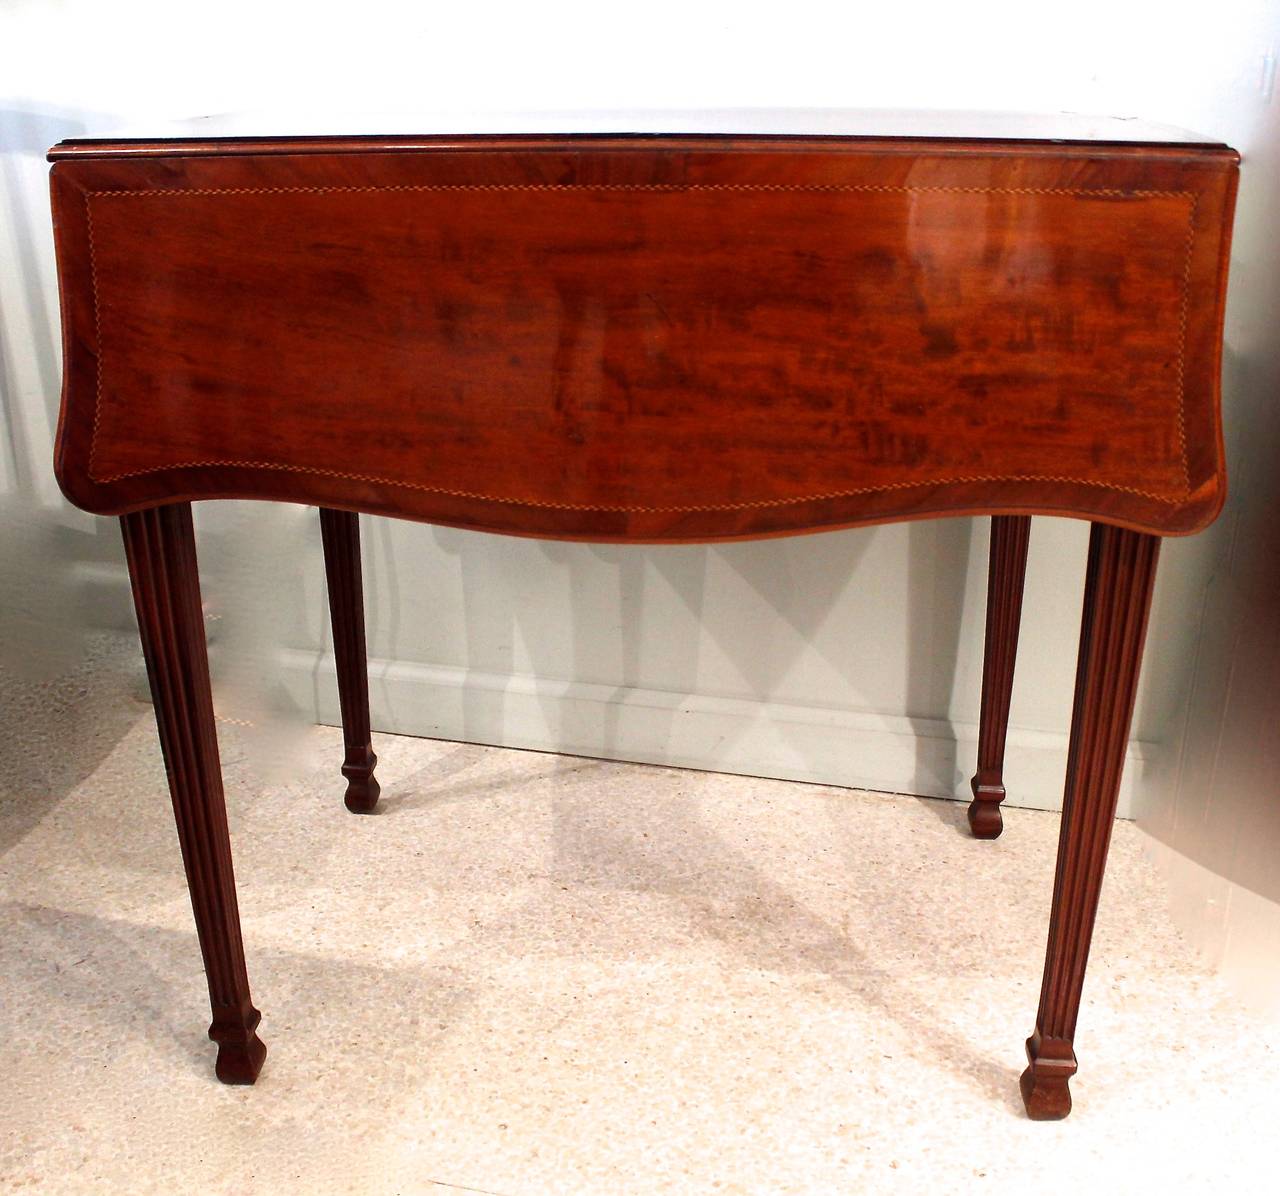 A small serpentine form Pembroke table, circa 1780s, of exceptional quality, with shaped leaves and tapered square fluted legs in the manner of Thomas Chippendale Jr. The top and drawers are cross banded and inlaid with a geometric herringbone